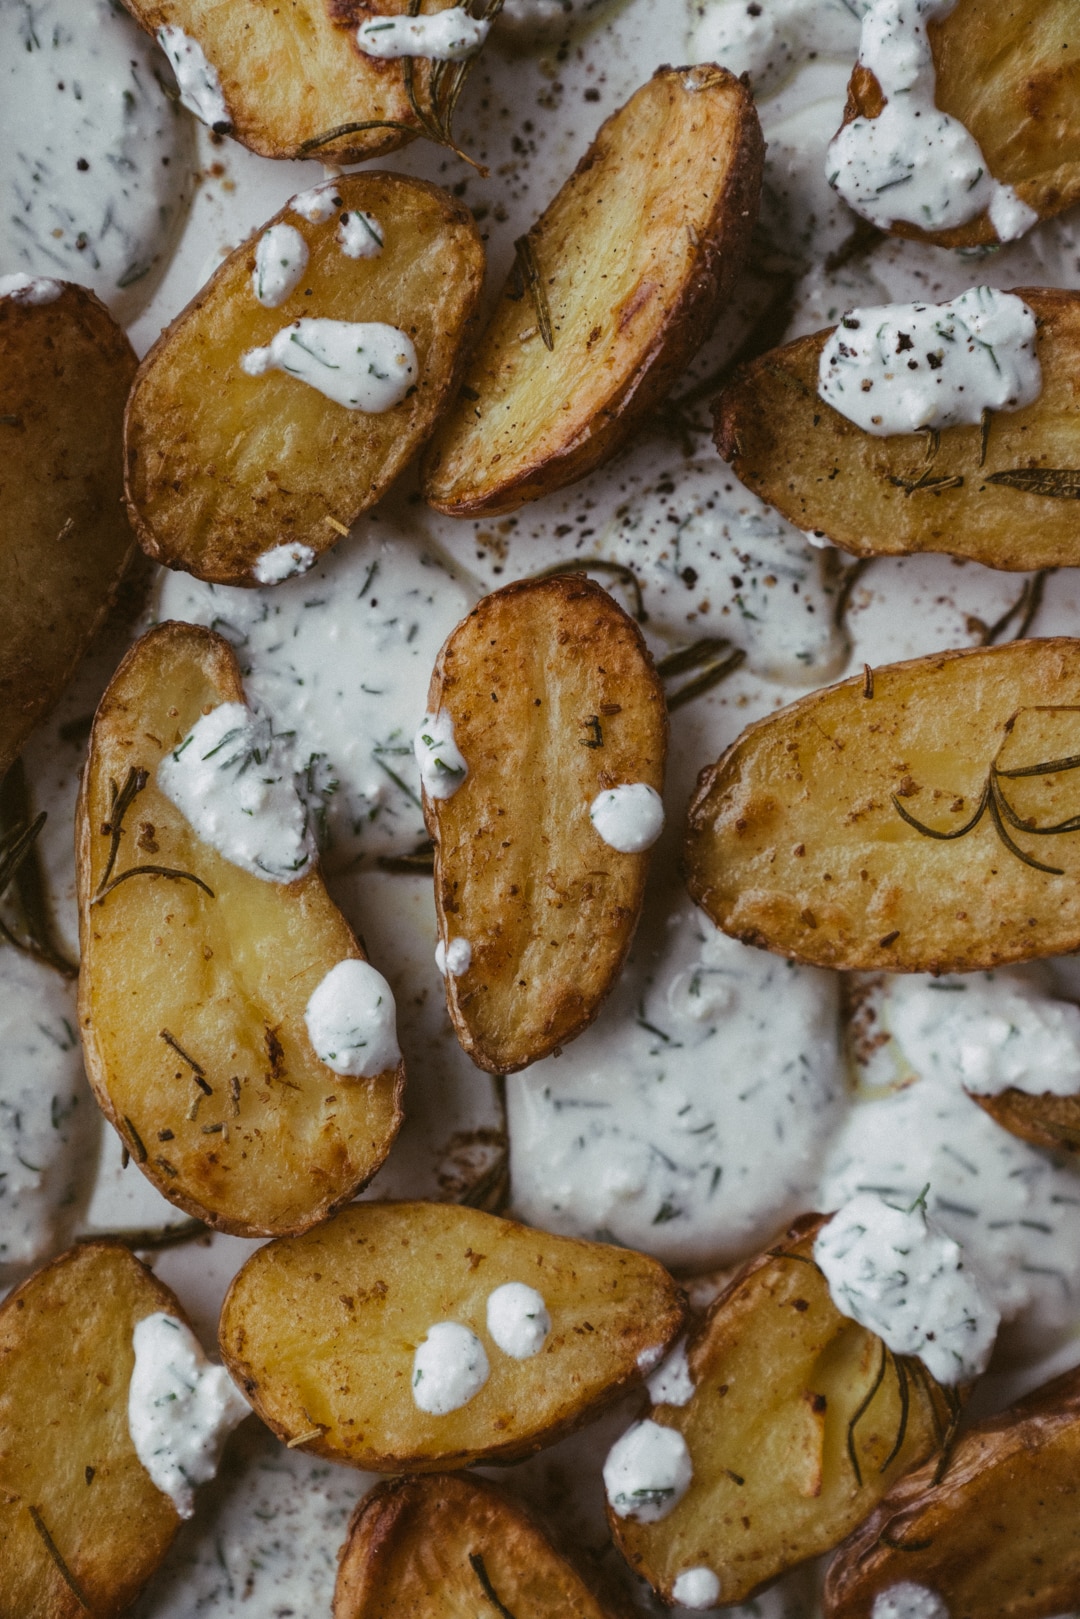 Oven Roasted Potatoes With Creamy Garlic Sauce